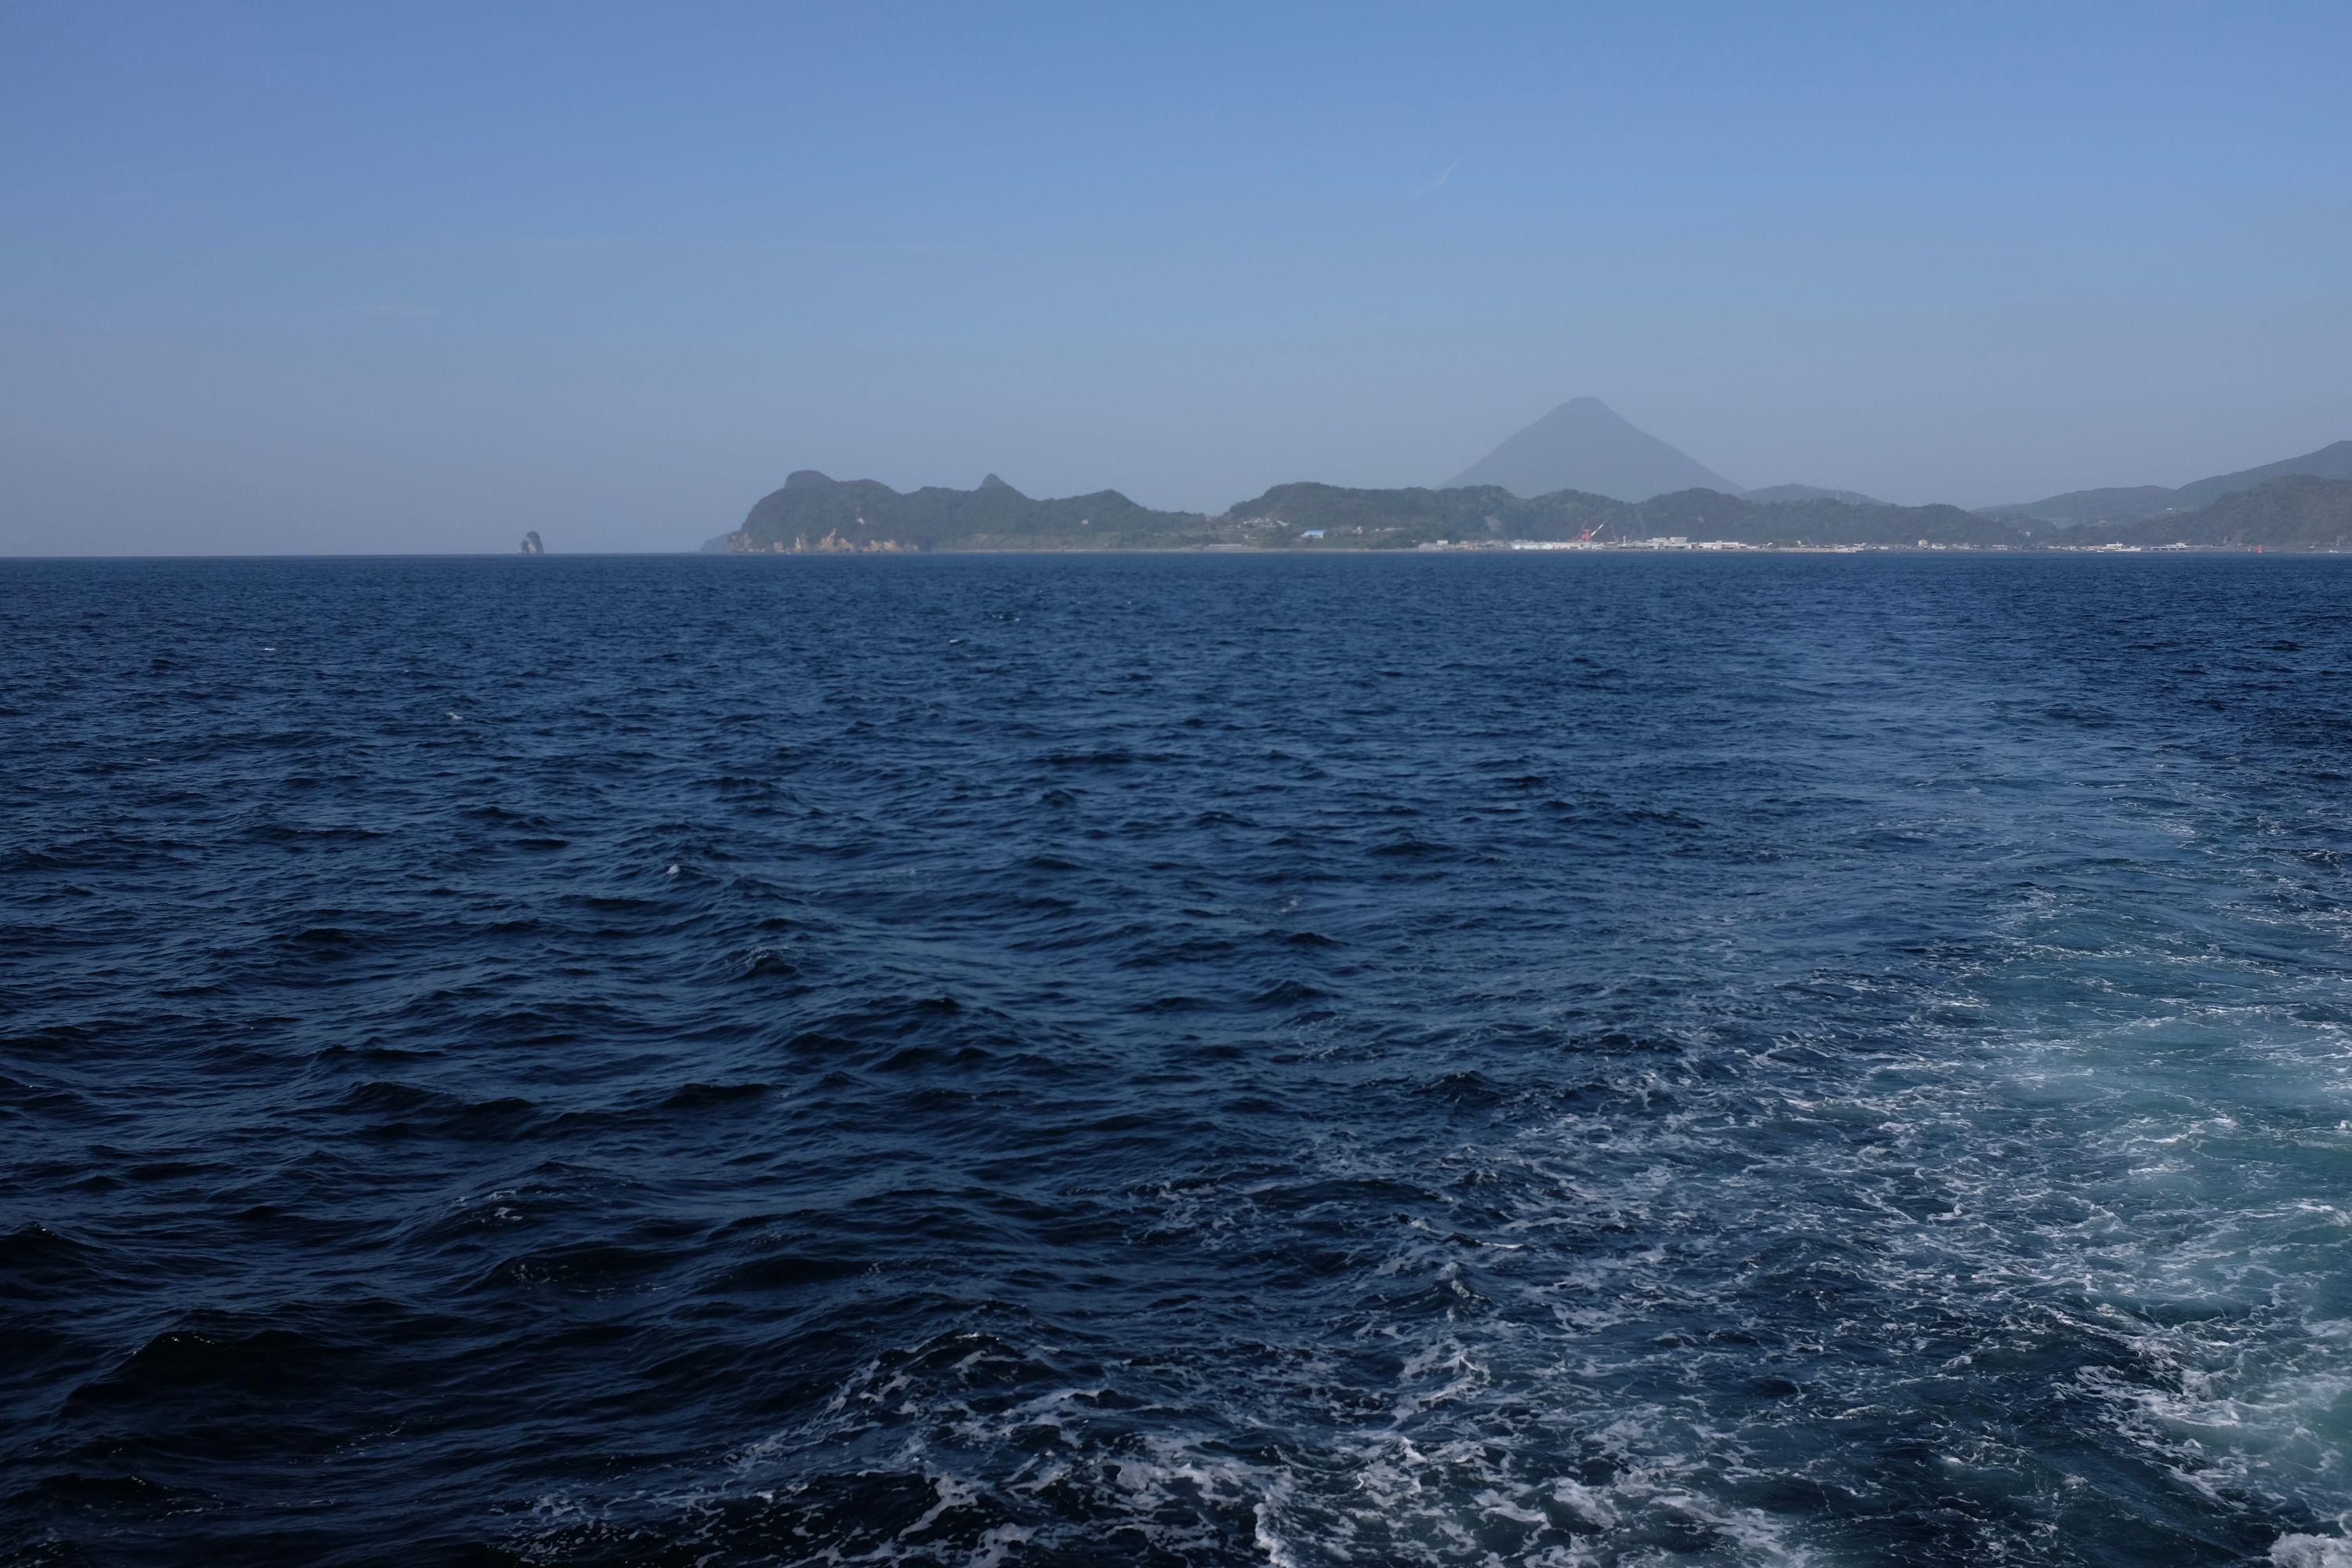 Mount Kaimon rises in the distance as seen from the ferry.